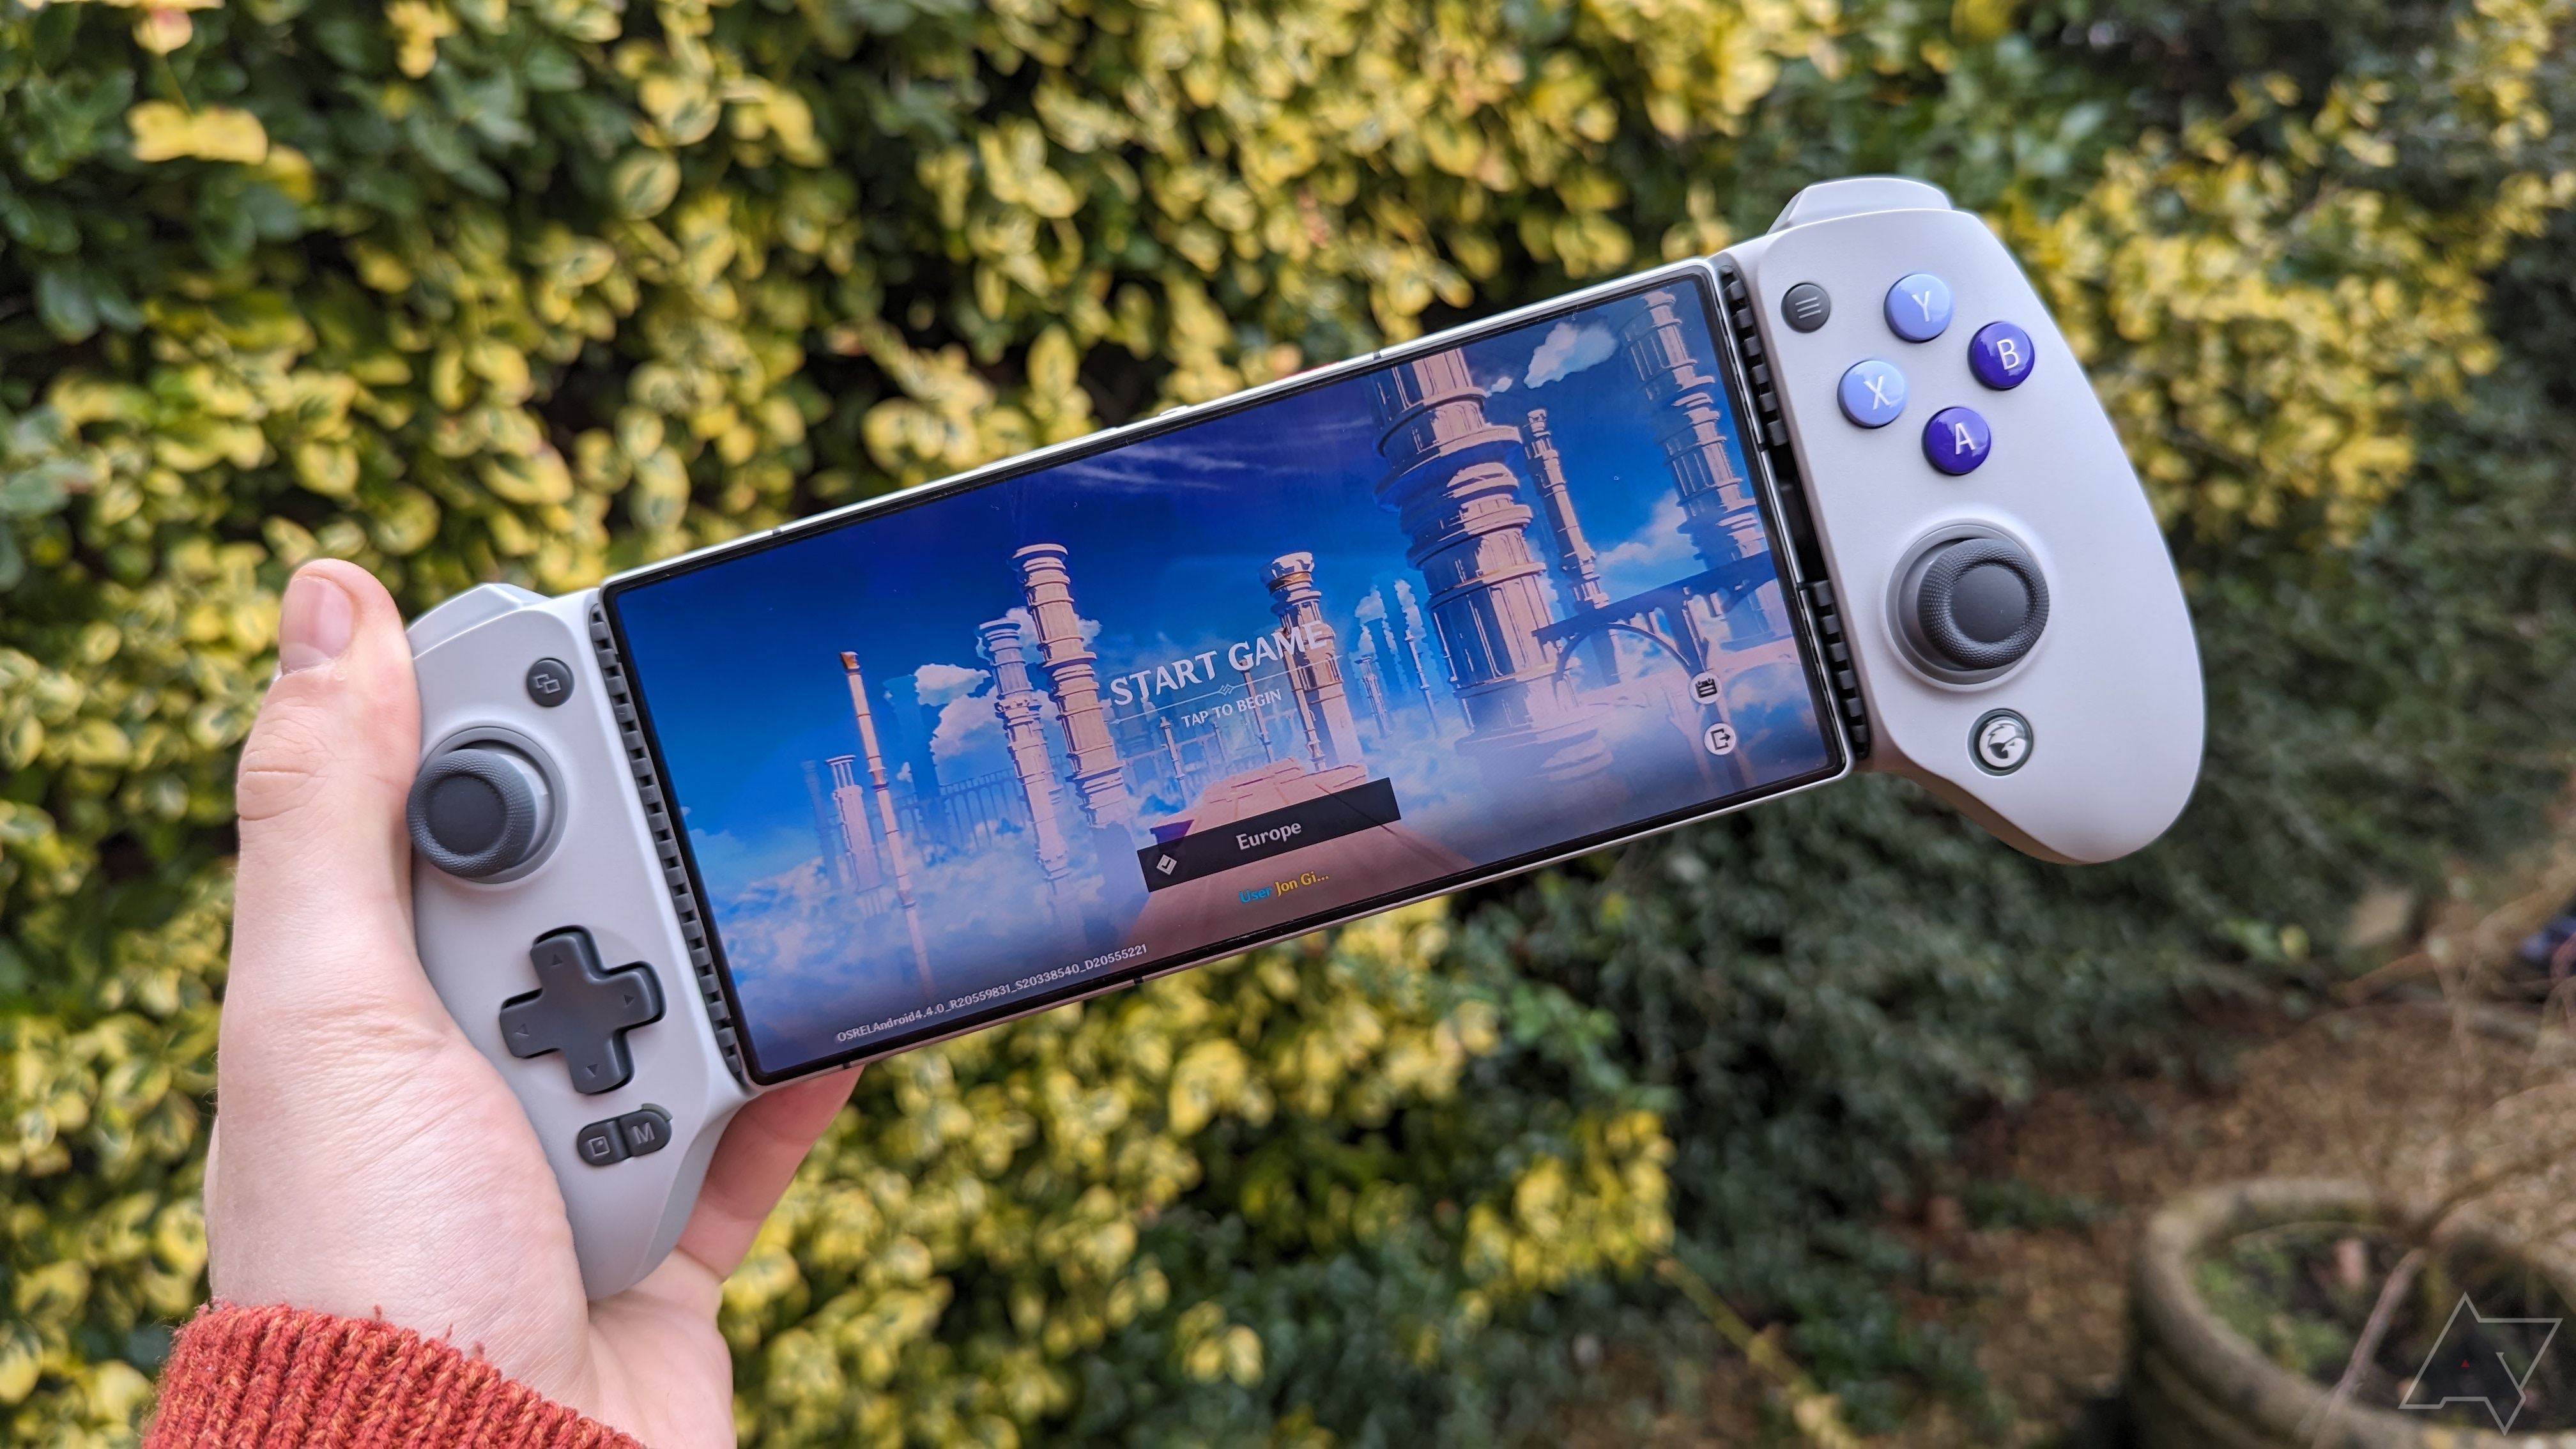 Gamesir G8 Galileo controller review: Function and form